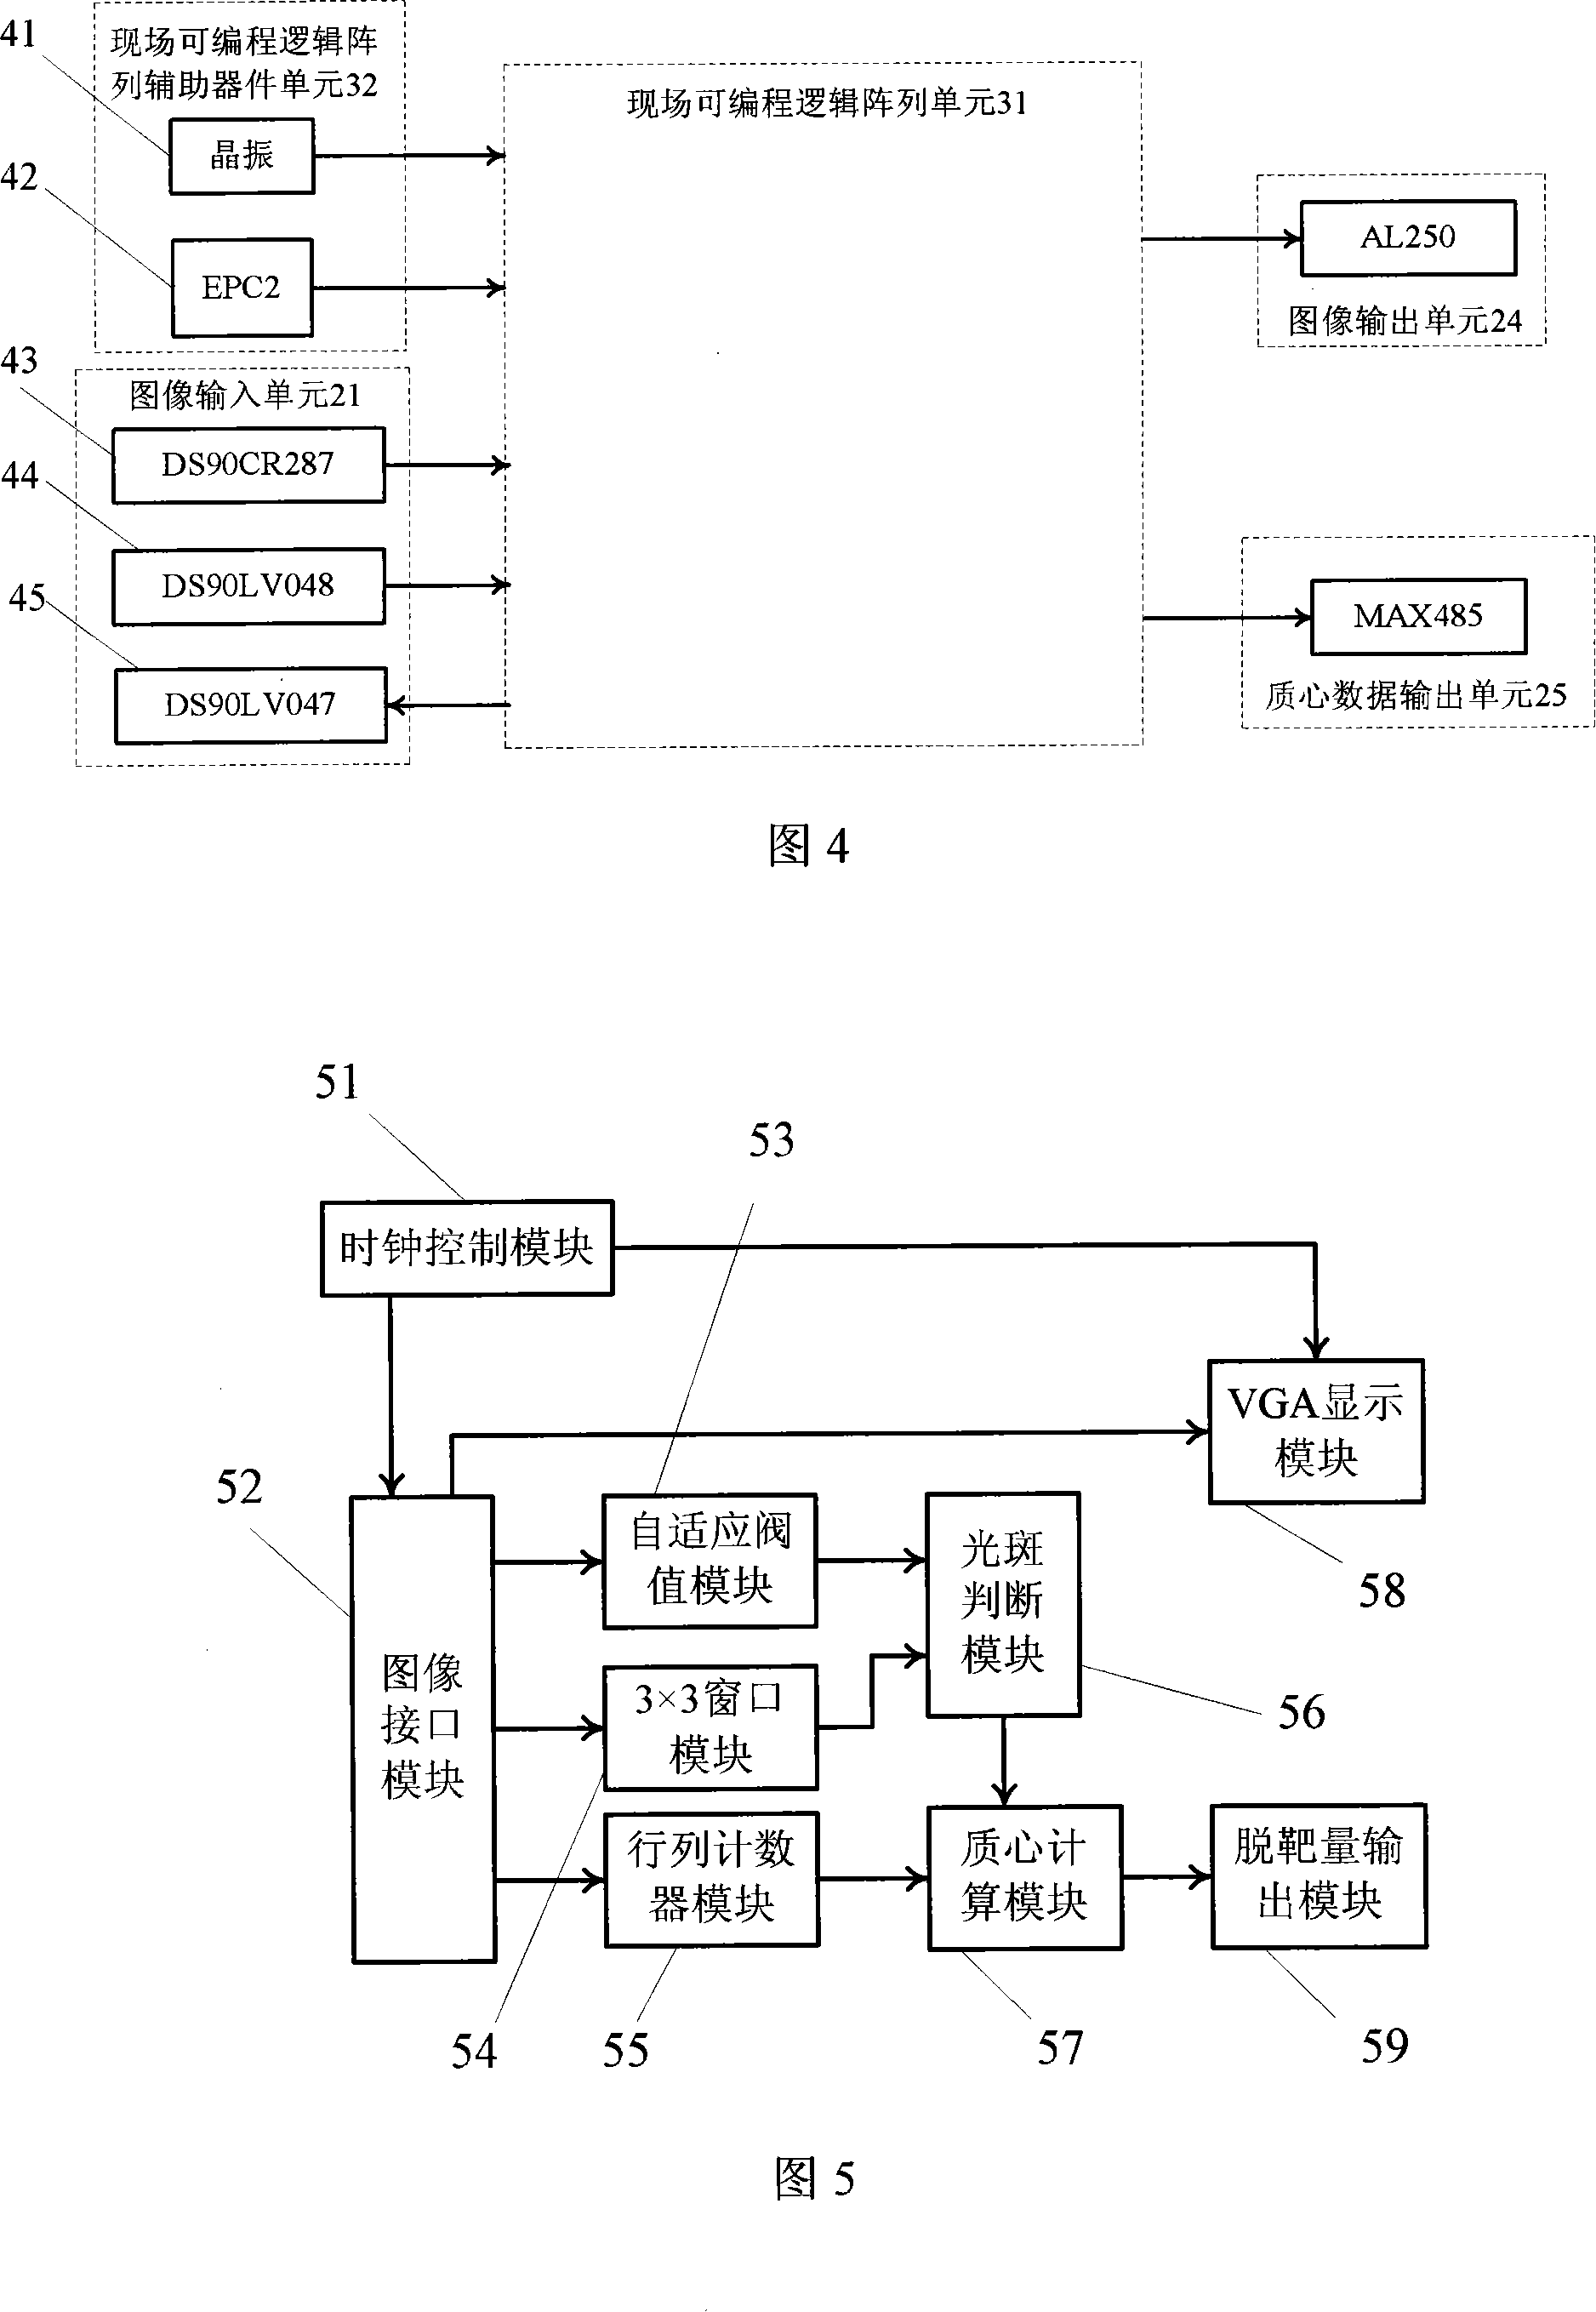 Detecting device for real-time computing facula mass center of field-programmable logic array